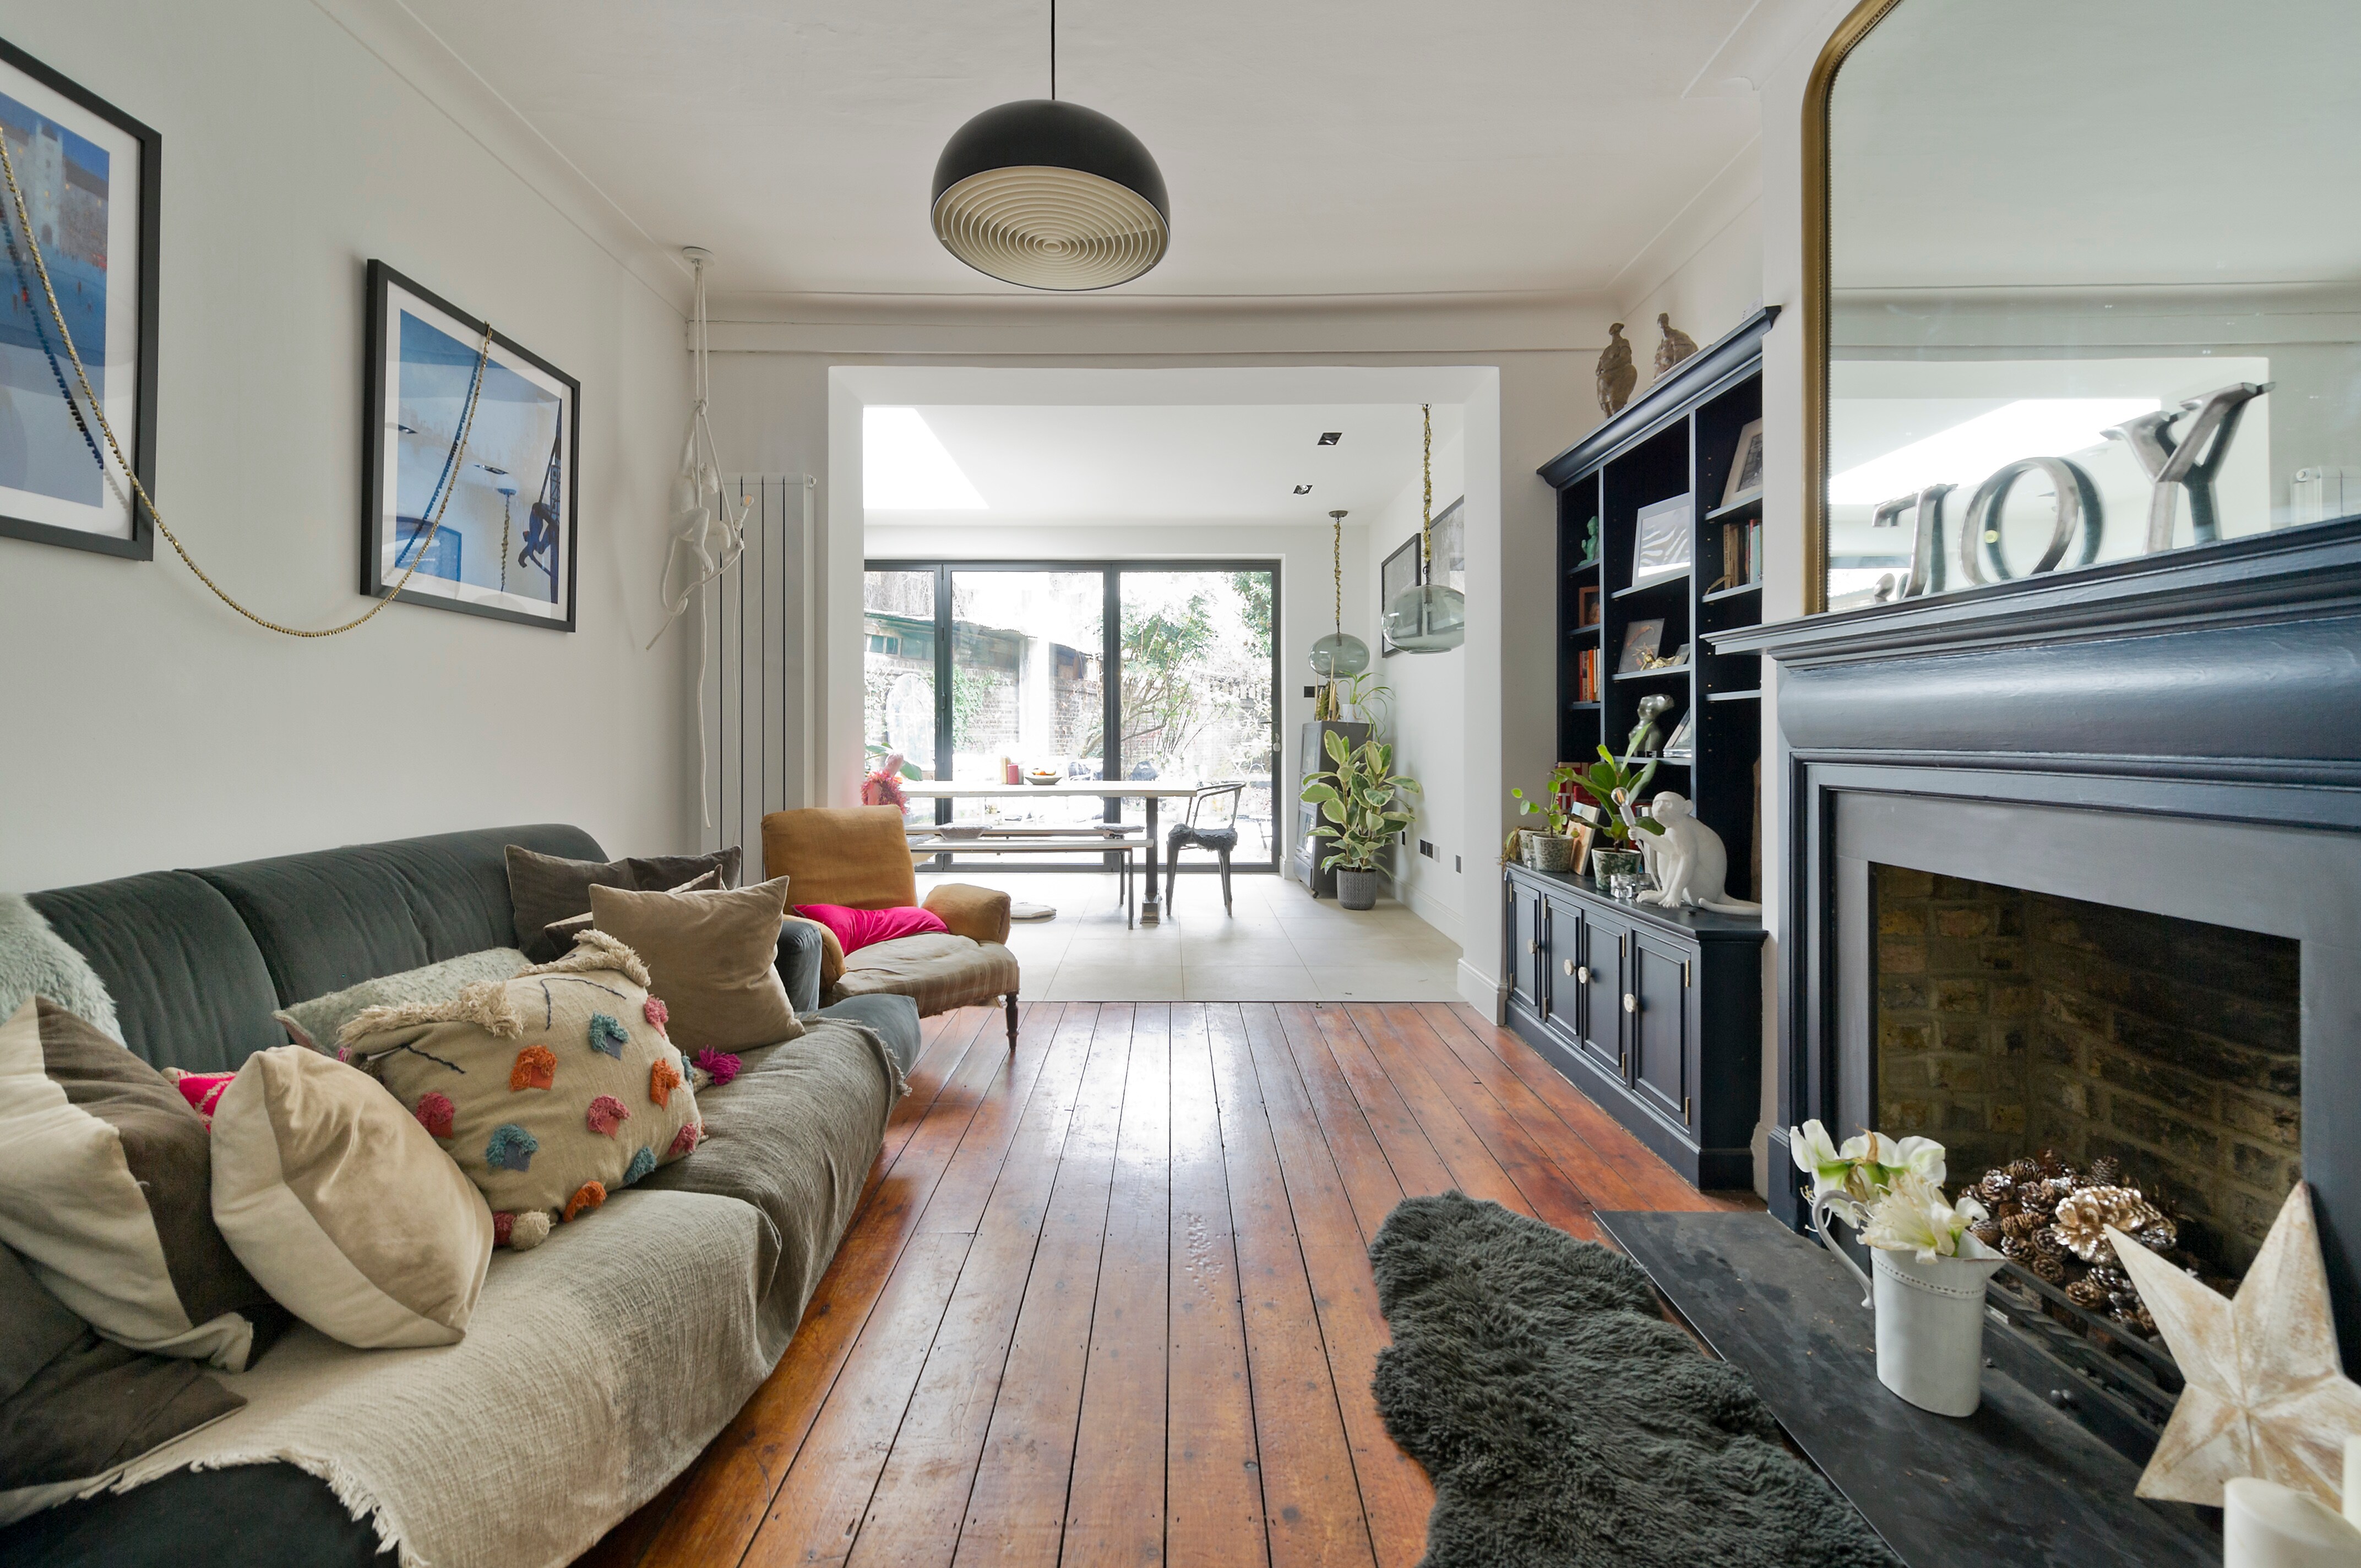 Property Image 1 - Stunning one bedroom flat with large terrace in Chiswick by UnderTheDoormat